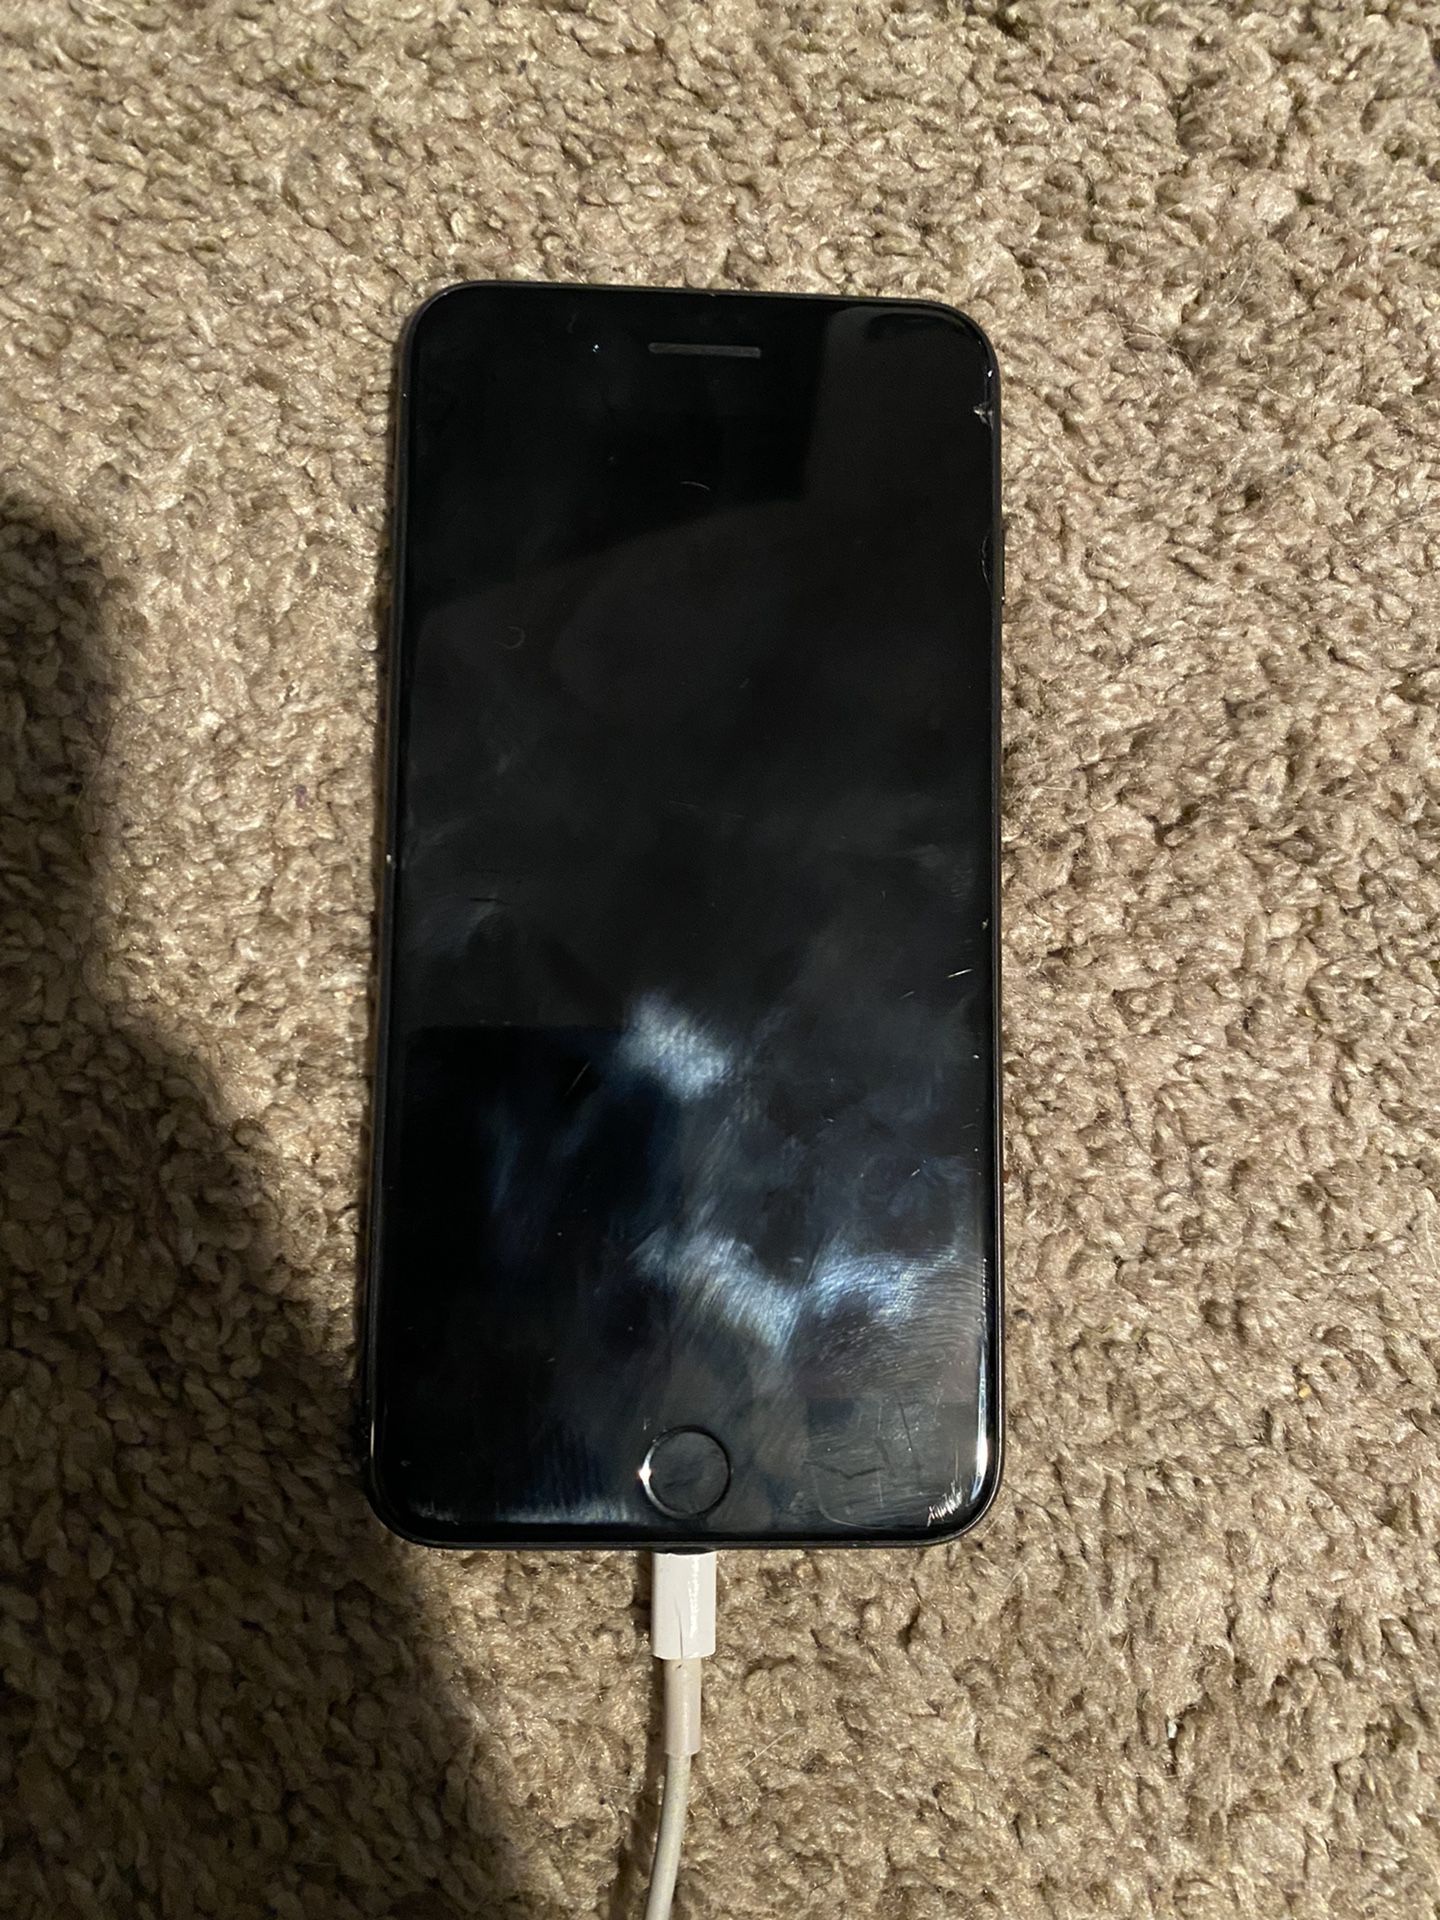 iPhone 7 Plus Unlocked 32 Gb (Great condition Works Fine)